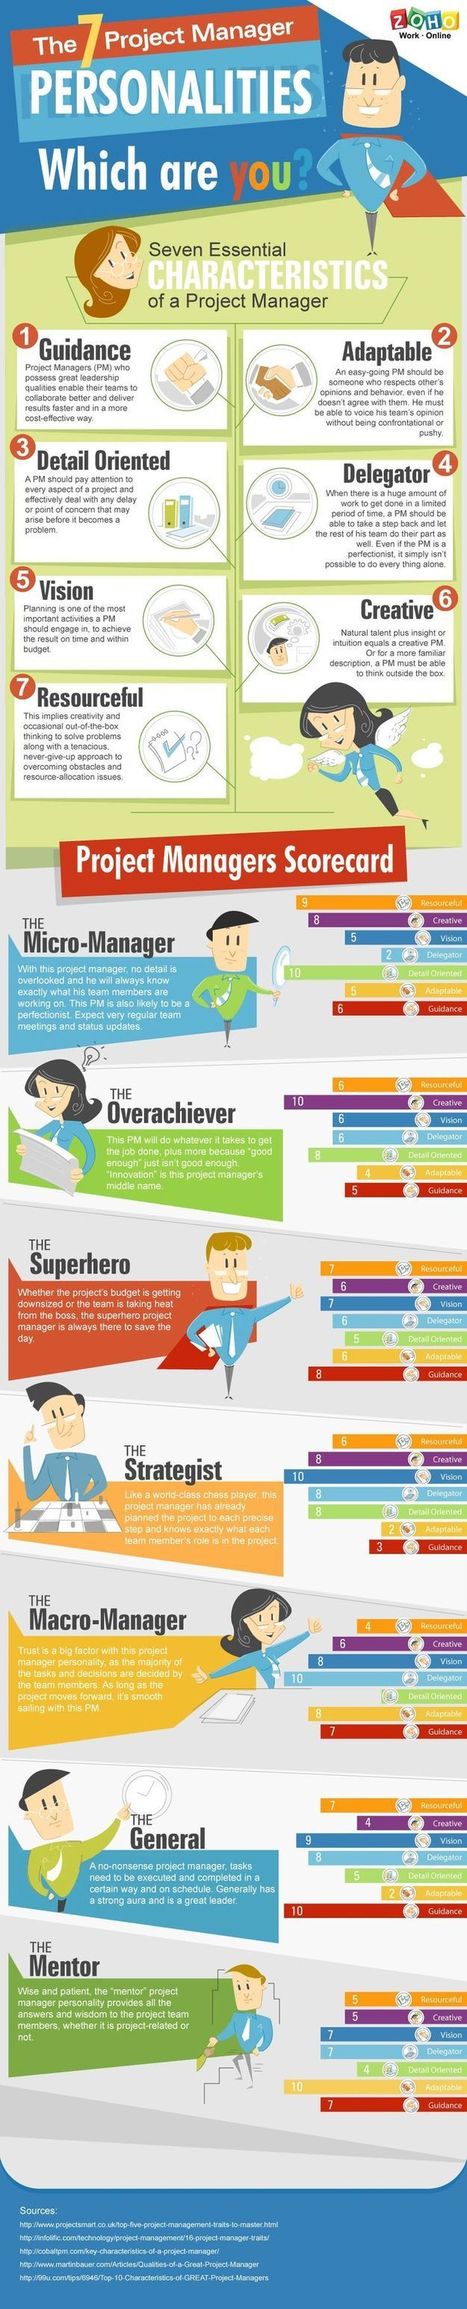 7 Project Manager Personalities-Which Are YOU? [Infographic] | 21st Century Learning and Teaching | Scoop.it